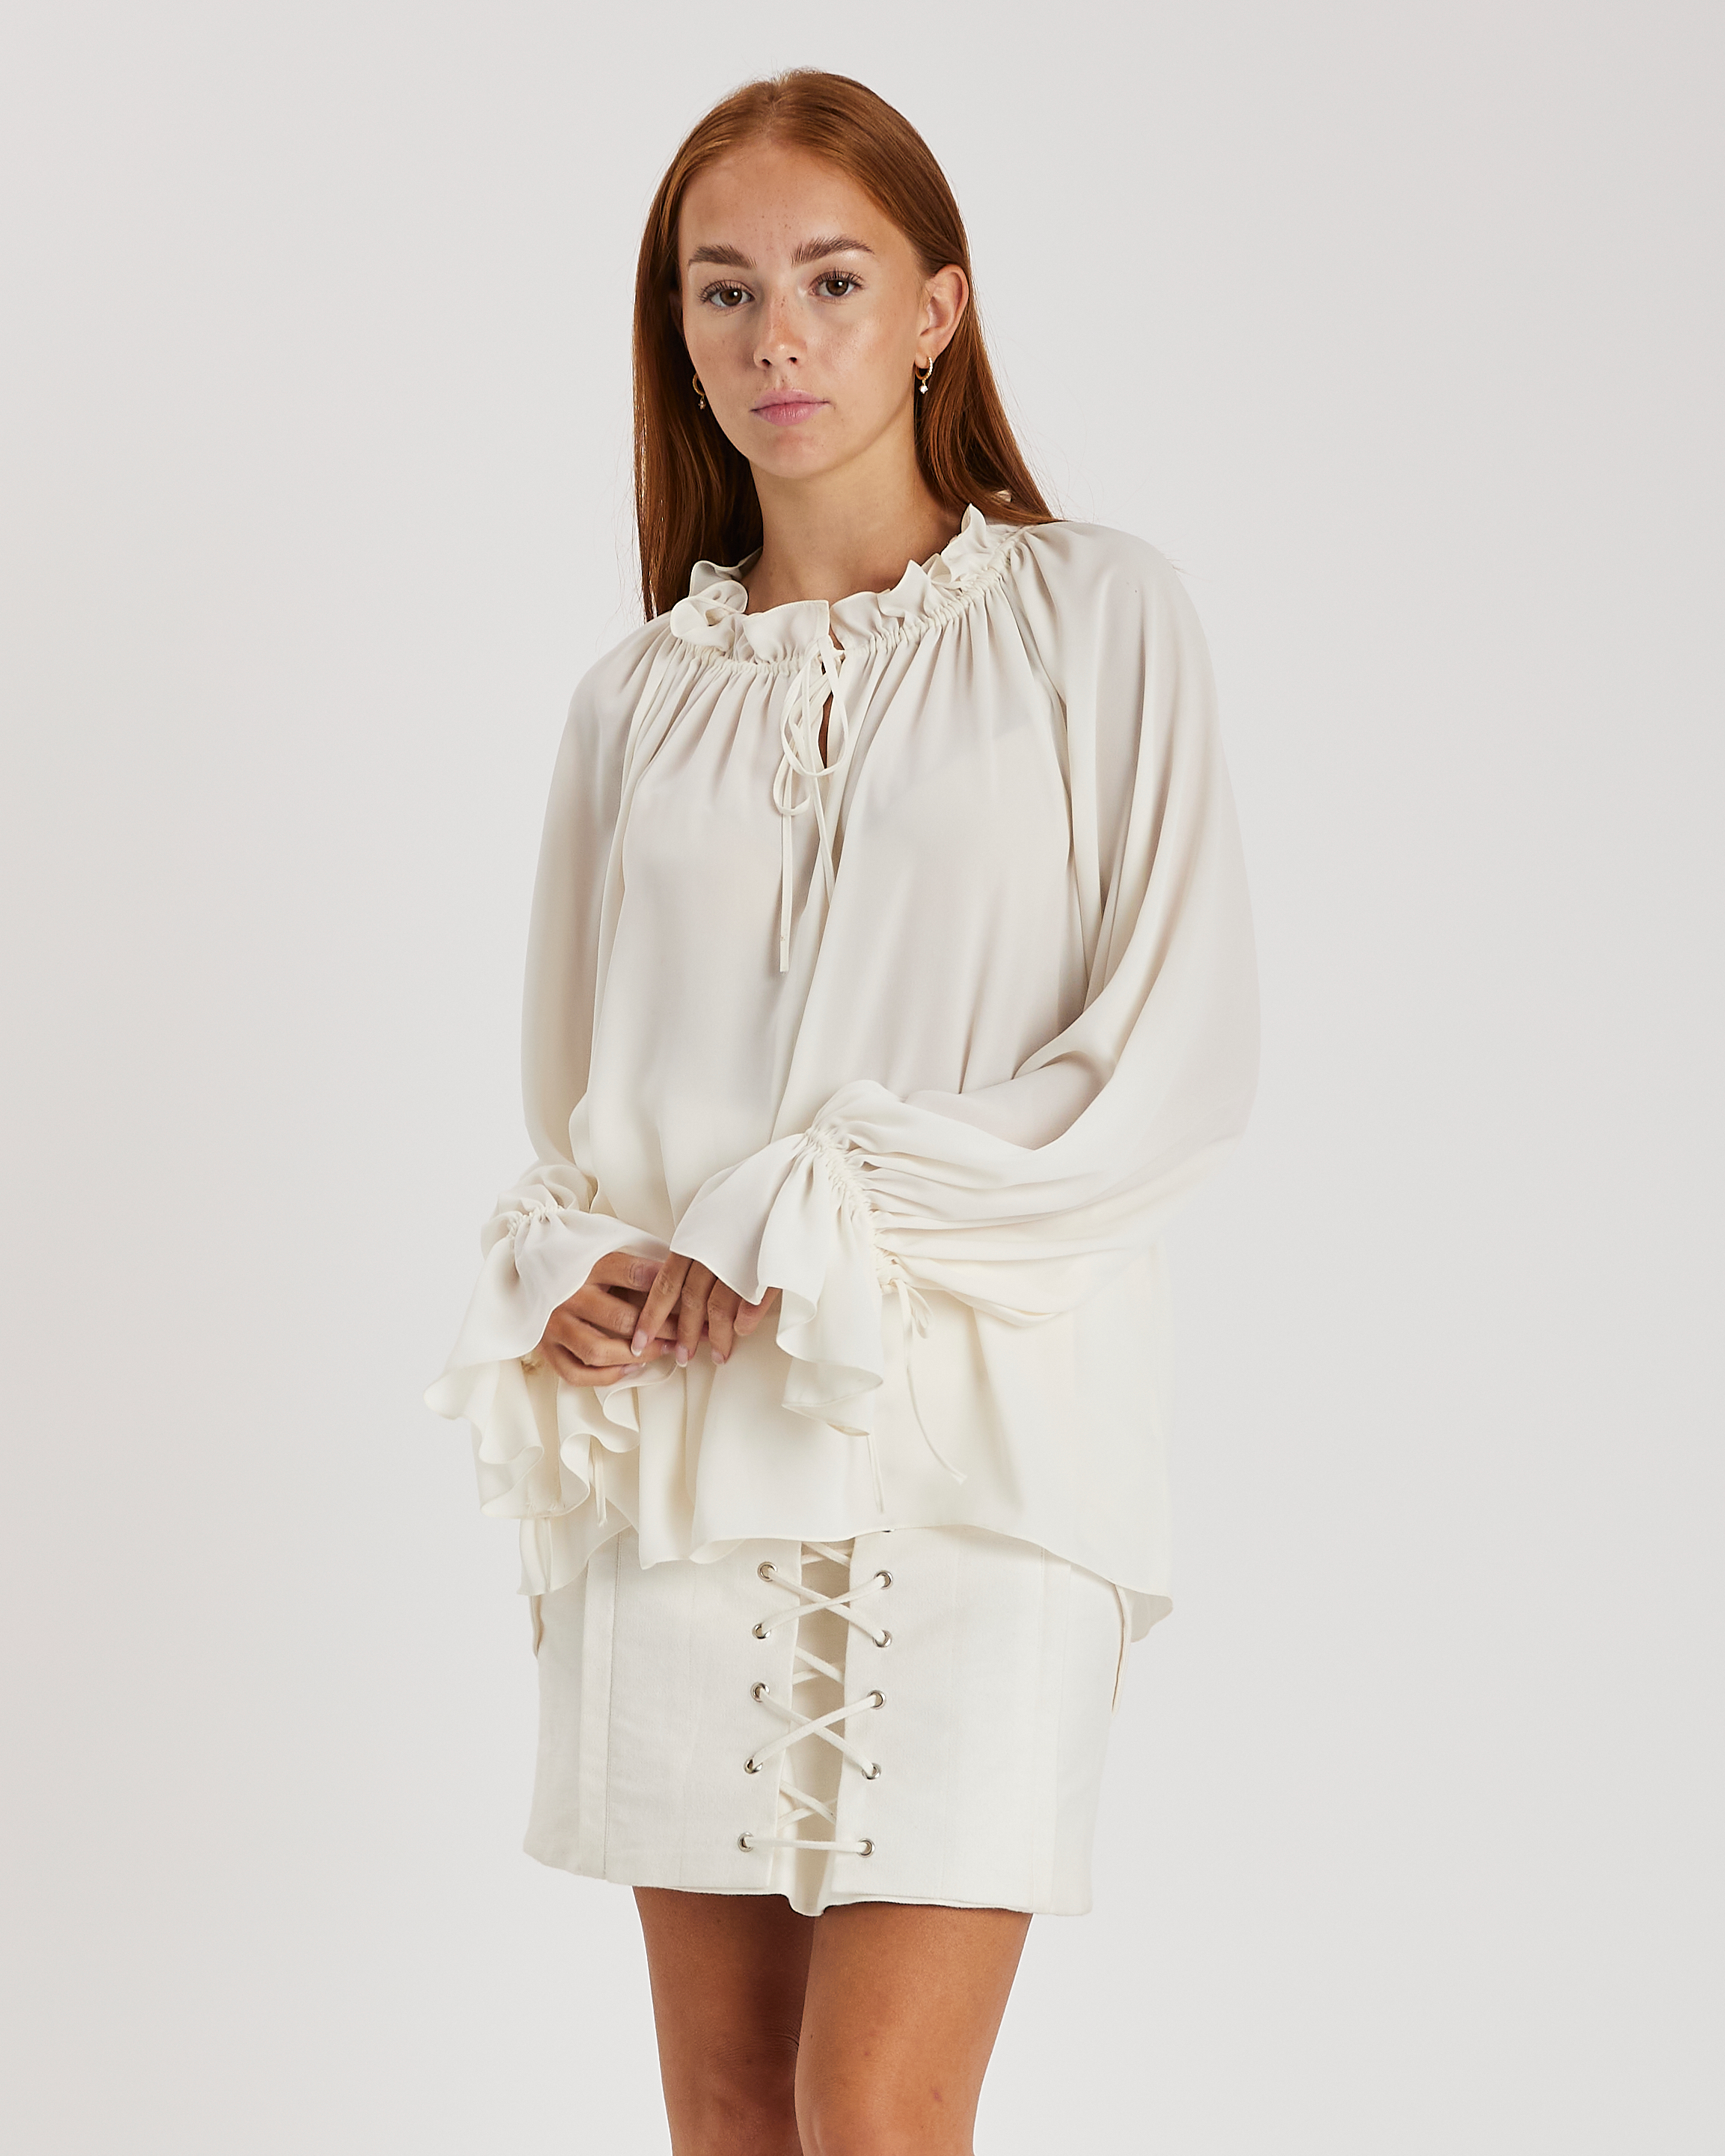 Straight Design Blouse with Circular Neckline, Keyhole Detail, and Flowy Sleeves